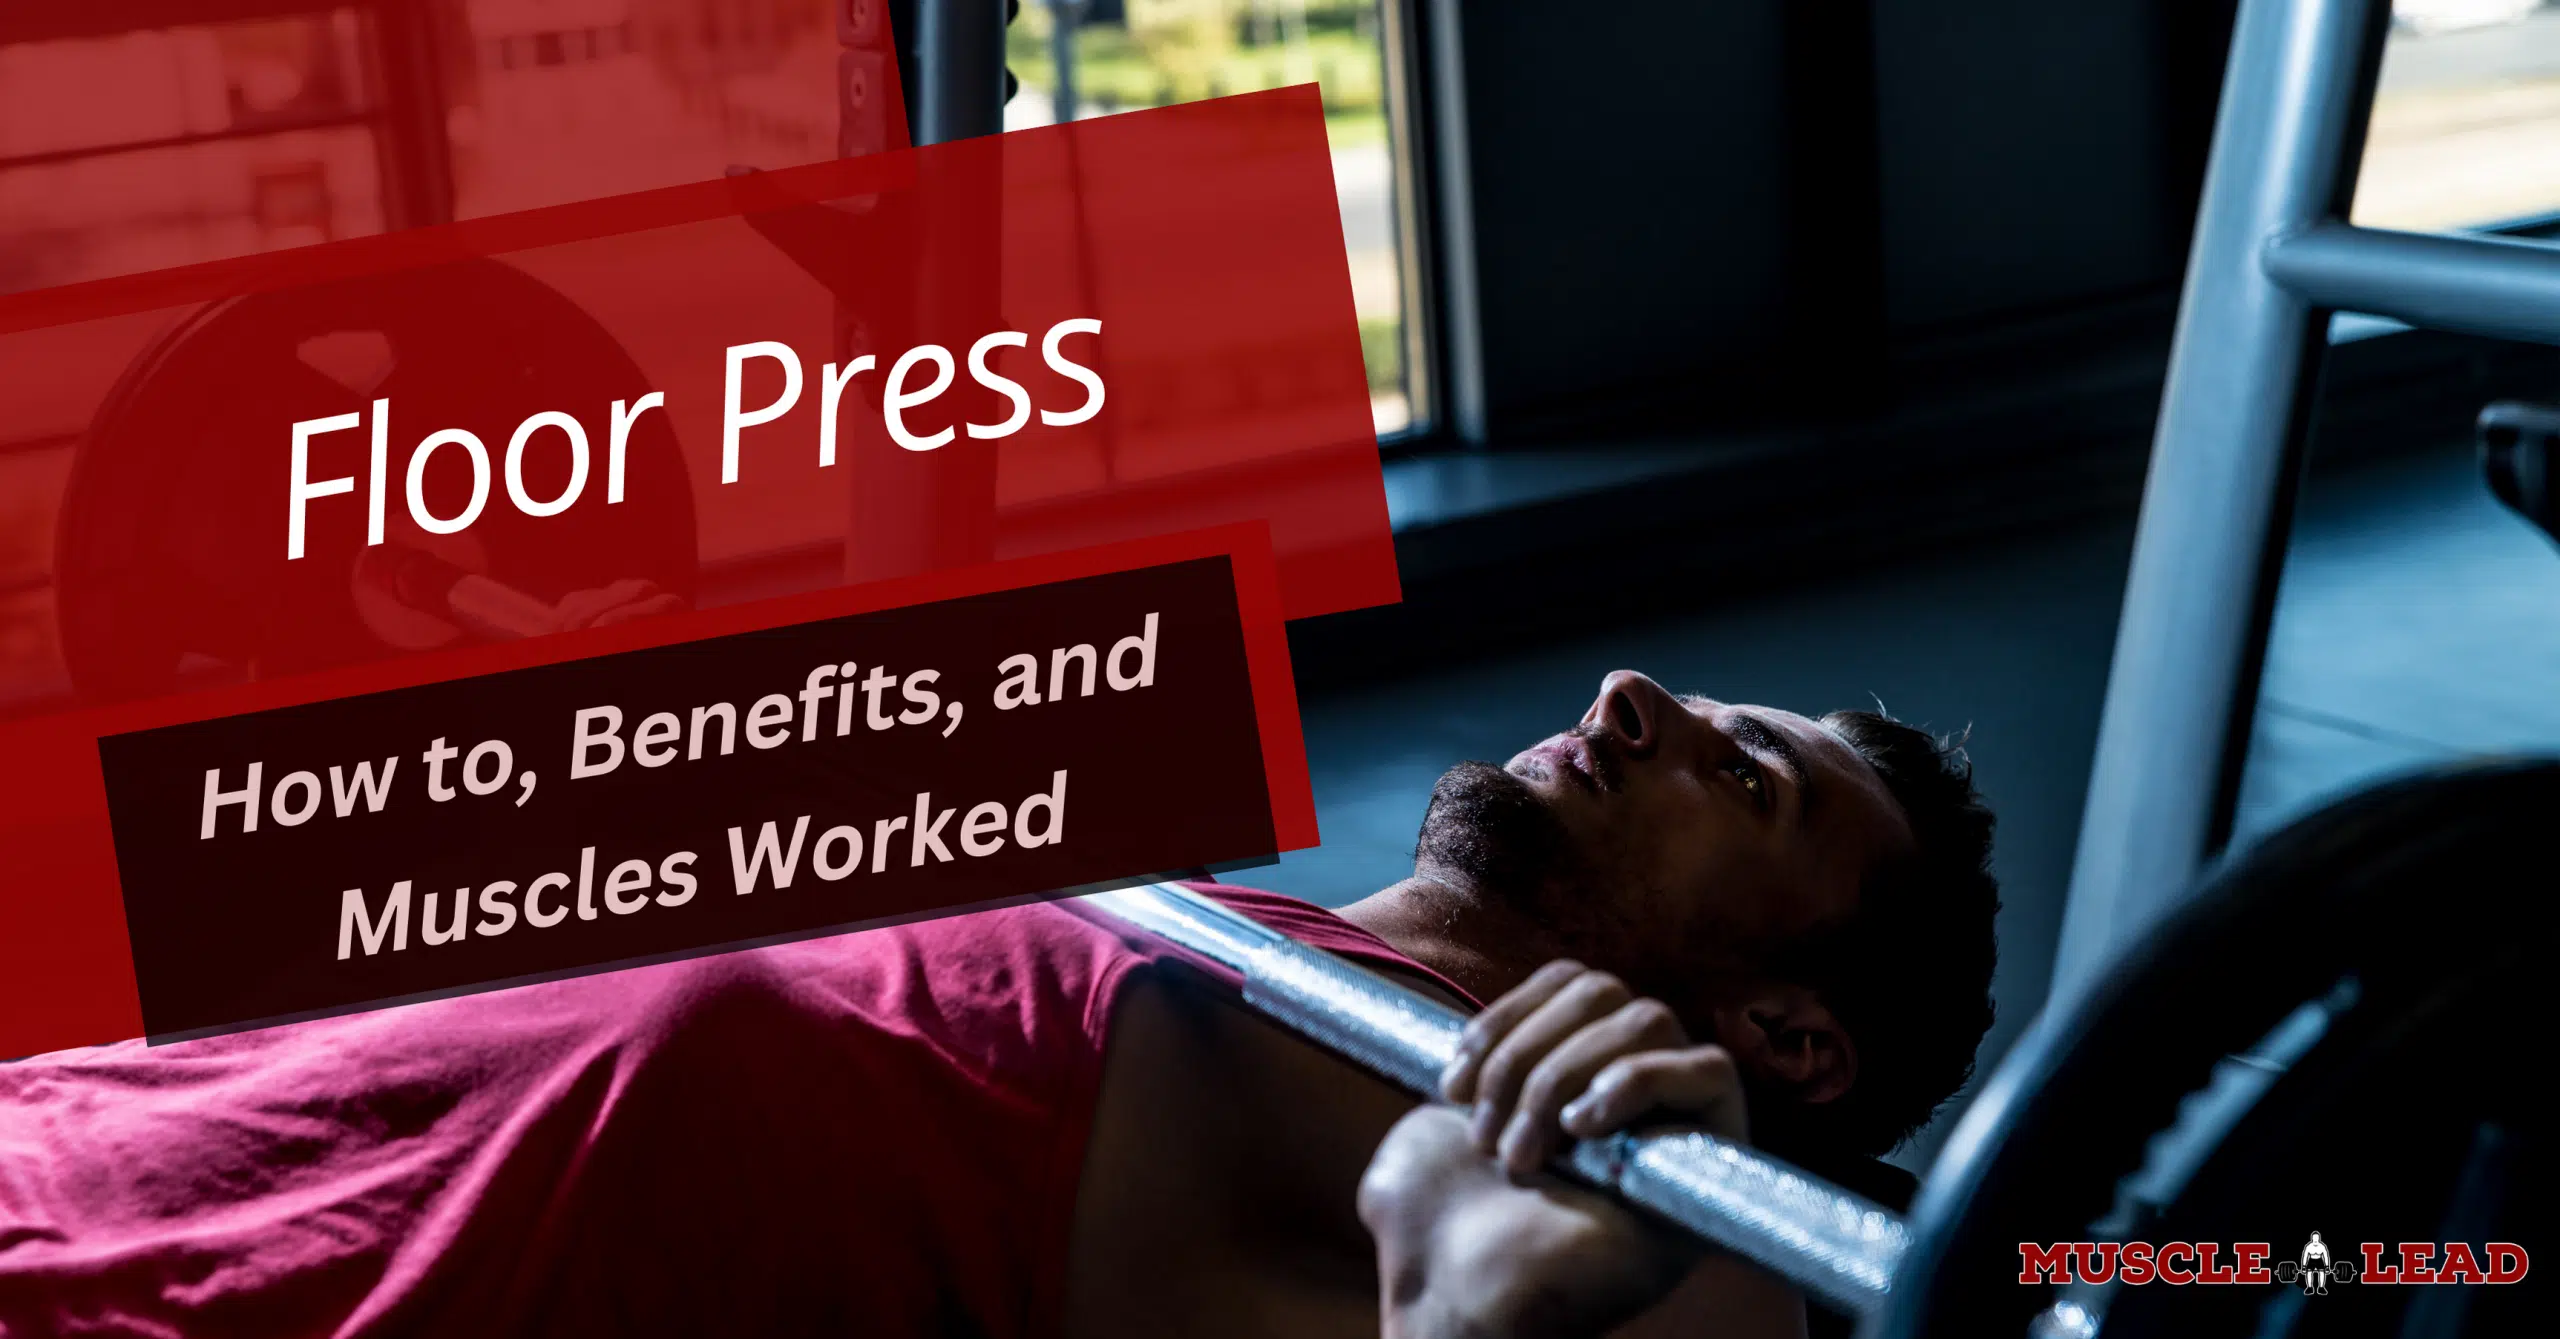 Floor Press How to, Benefits, and Muscles Worked